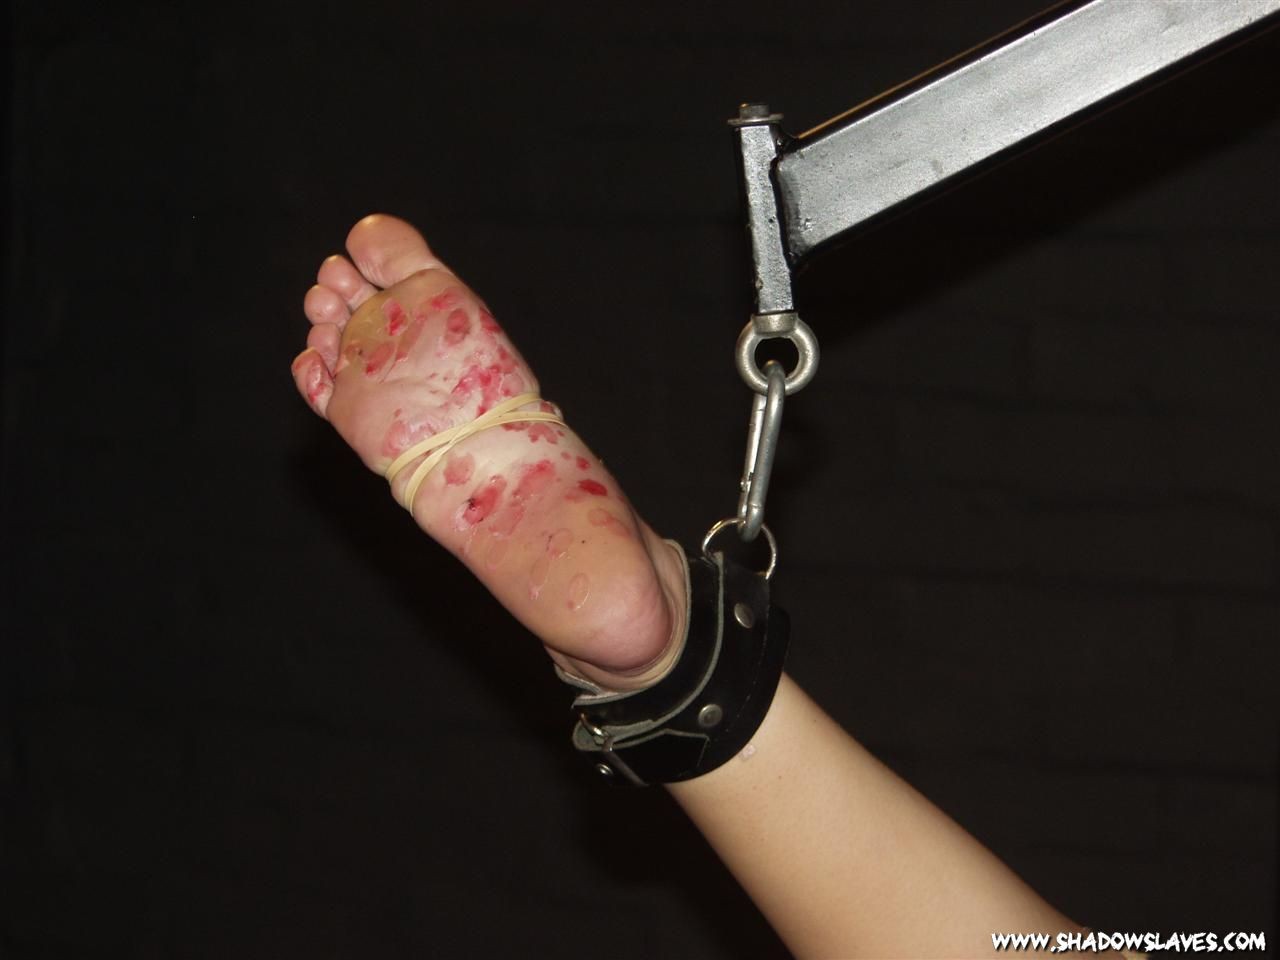 Bound feet punished and foot fetish hotwax punishment of restrained blonde amate #72084052